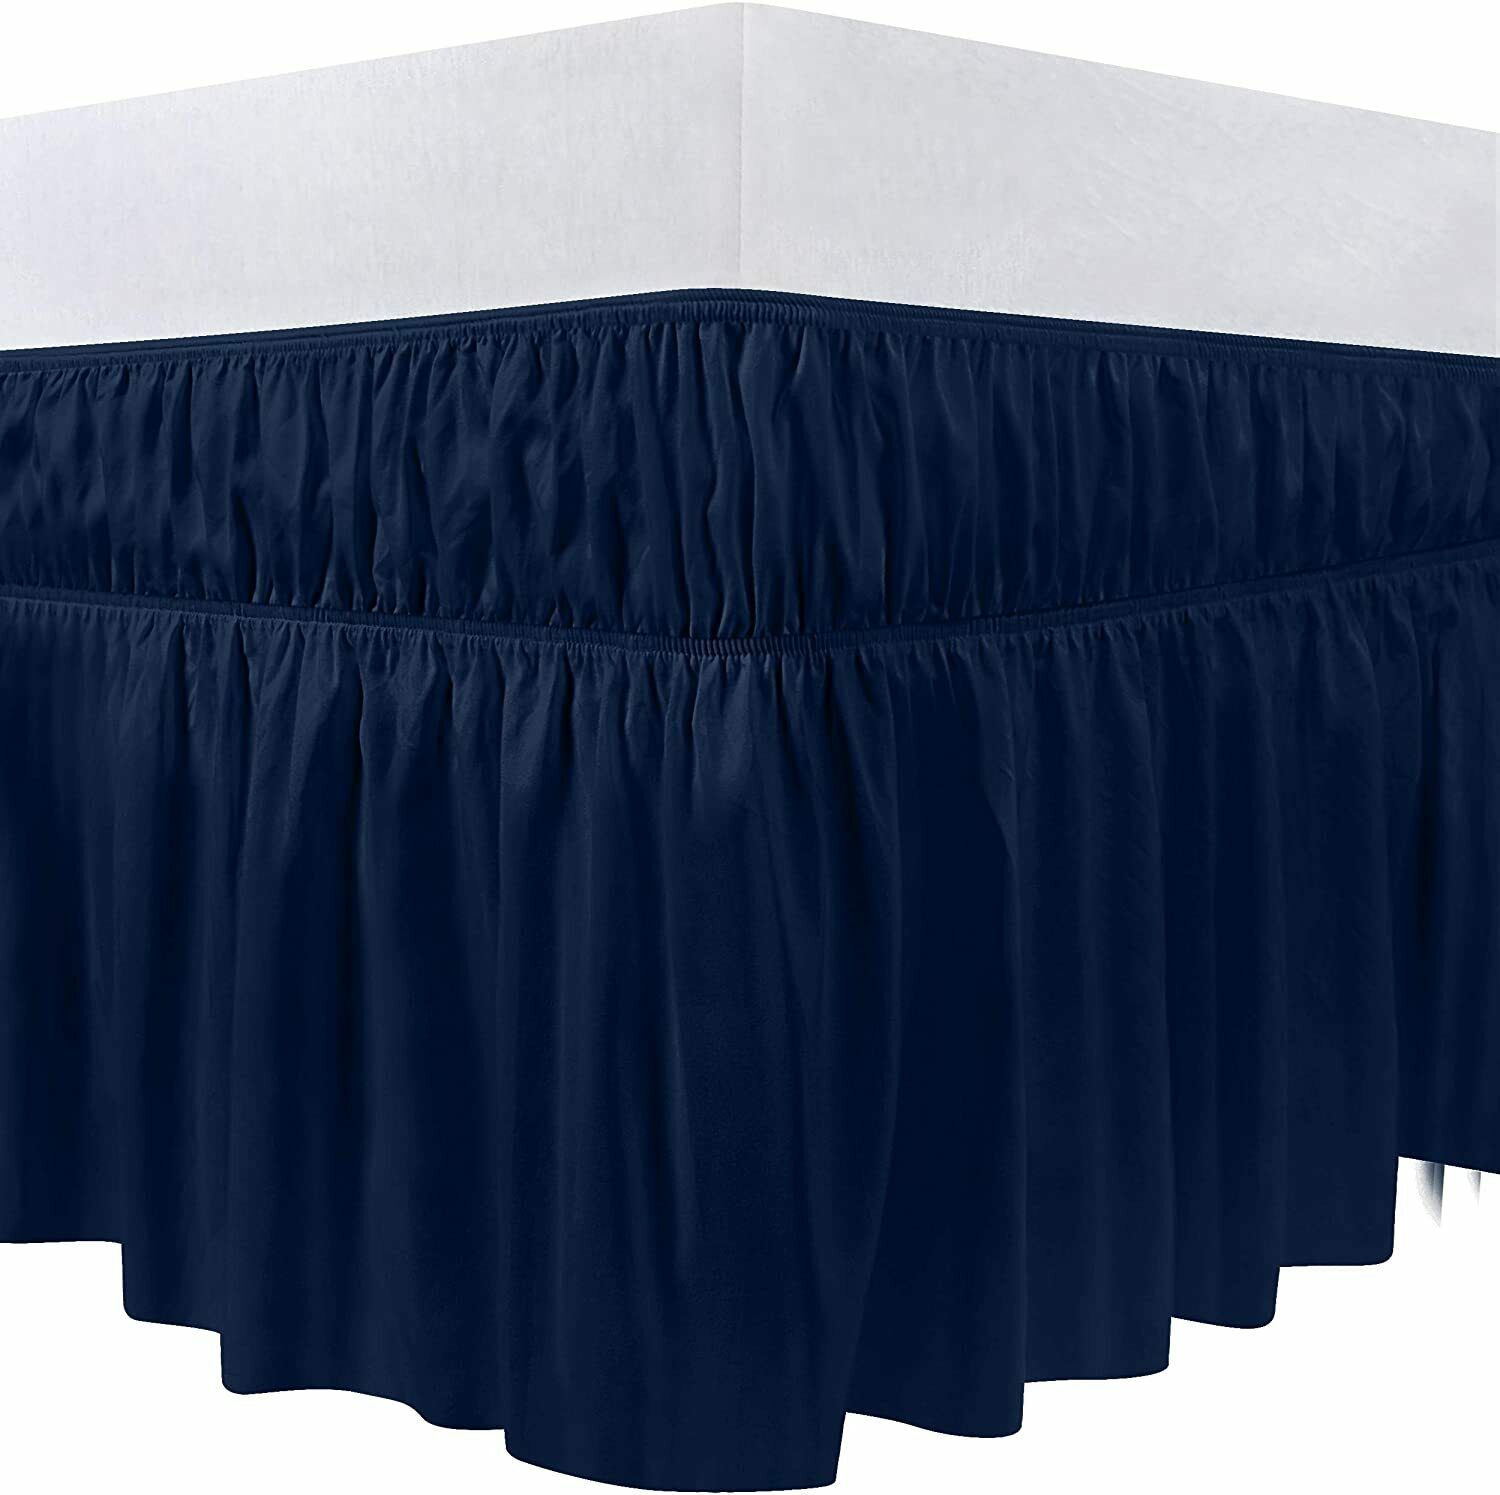 Elastic Bed Ruffle Skirt With 16 Inches Drop Utopia Bedding